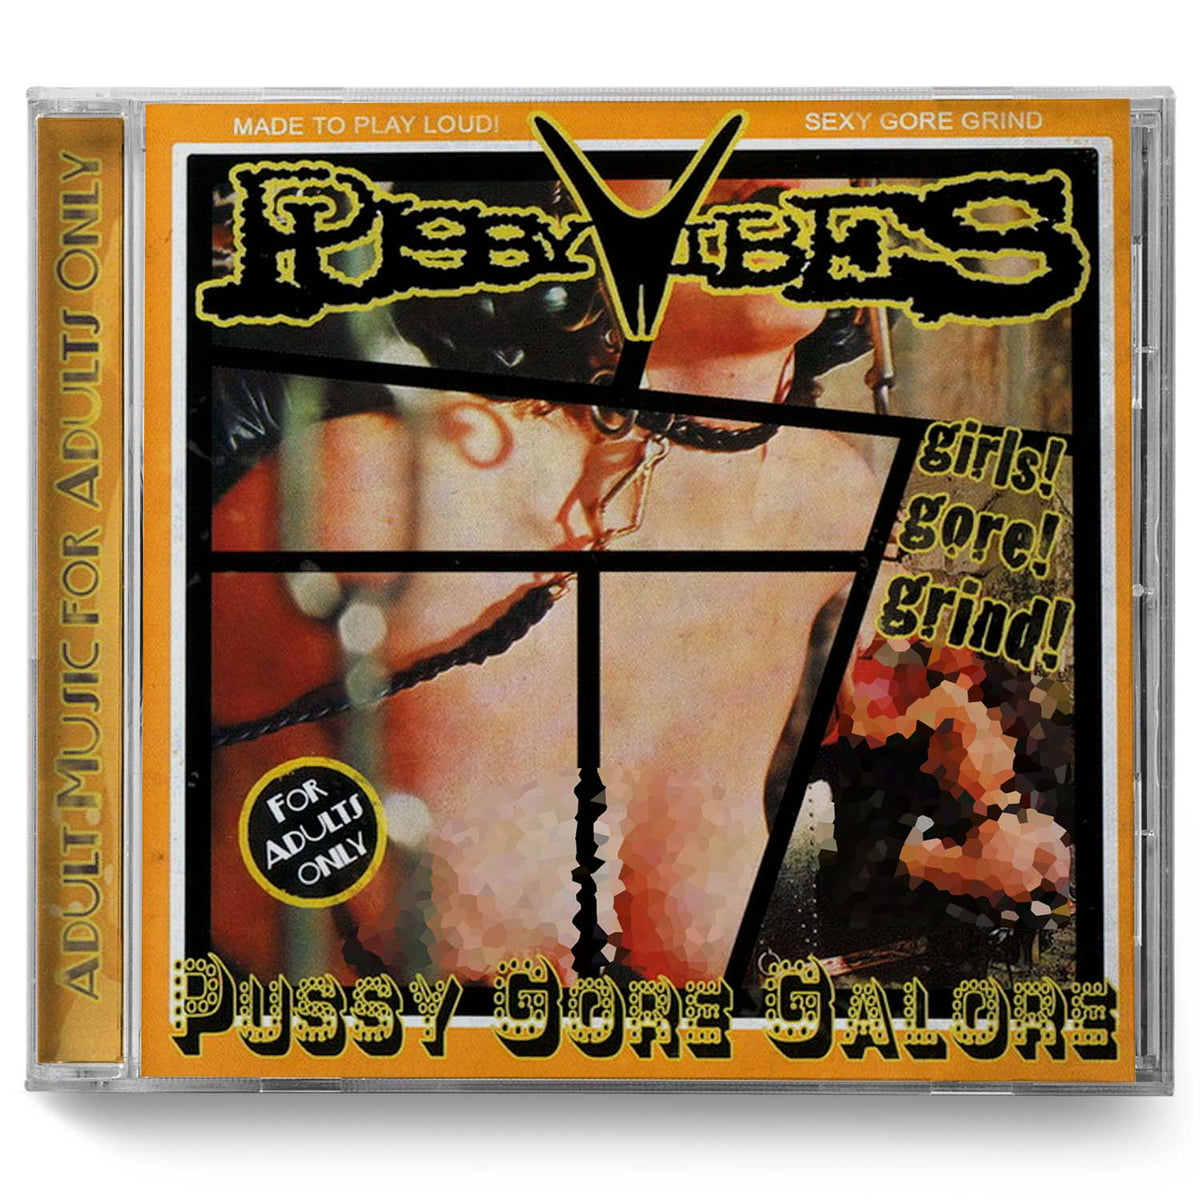 Puss*vibes "Puss* Gore Galore" CD